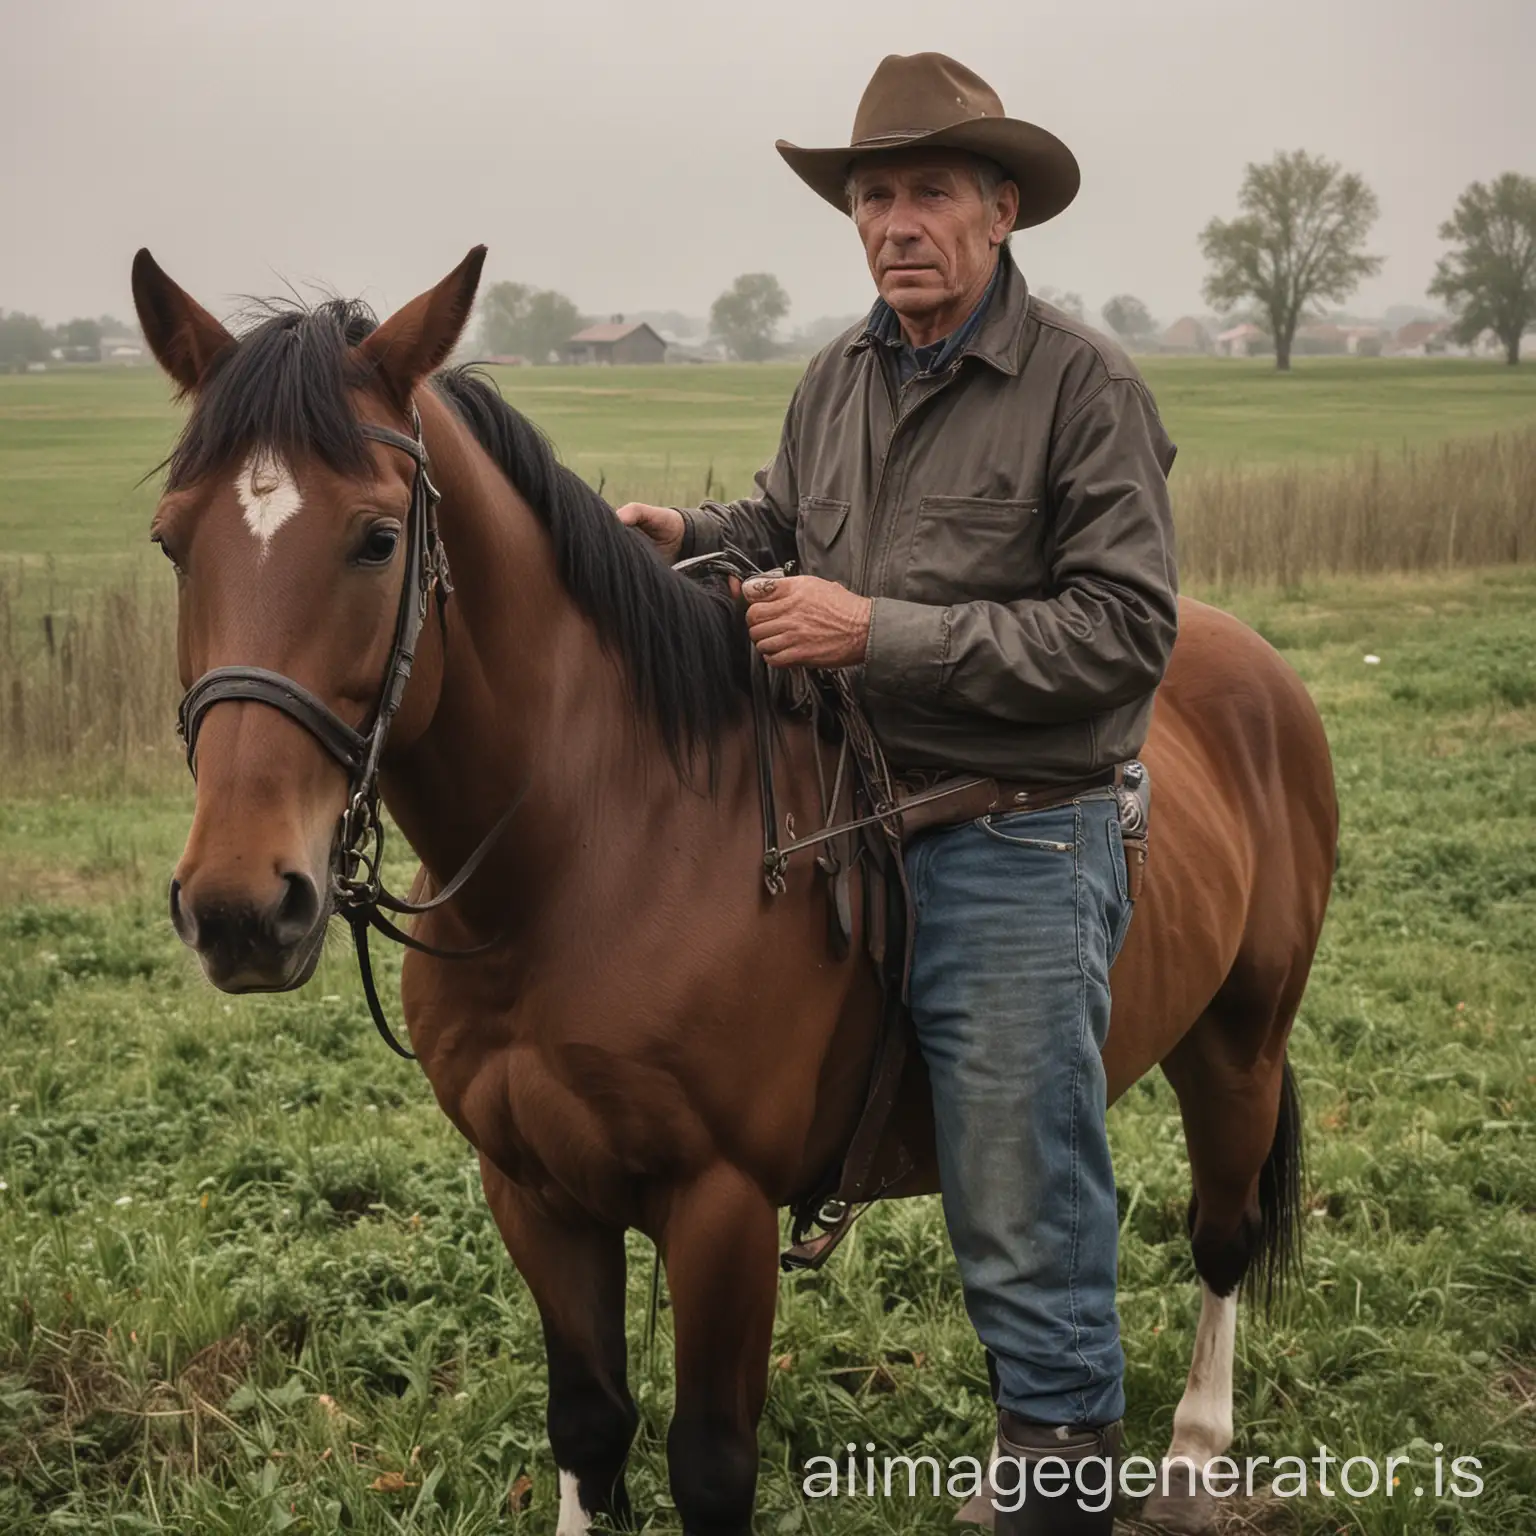 RIECO was a man passionate about horses. Every morning he went out on horseback rides through the fields near his house. He was an experienced and skilled horseman, always seeking new challenges.n